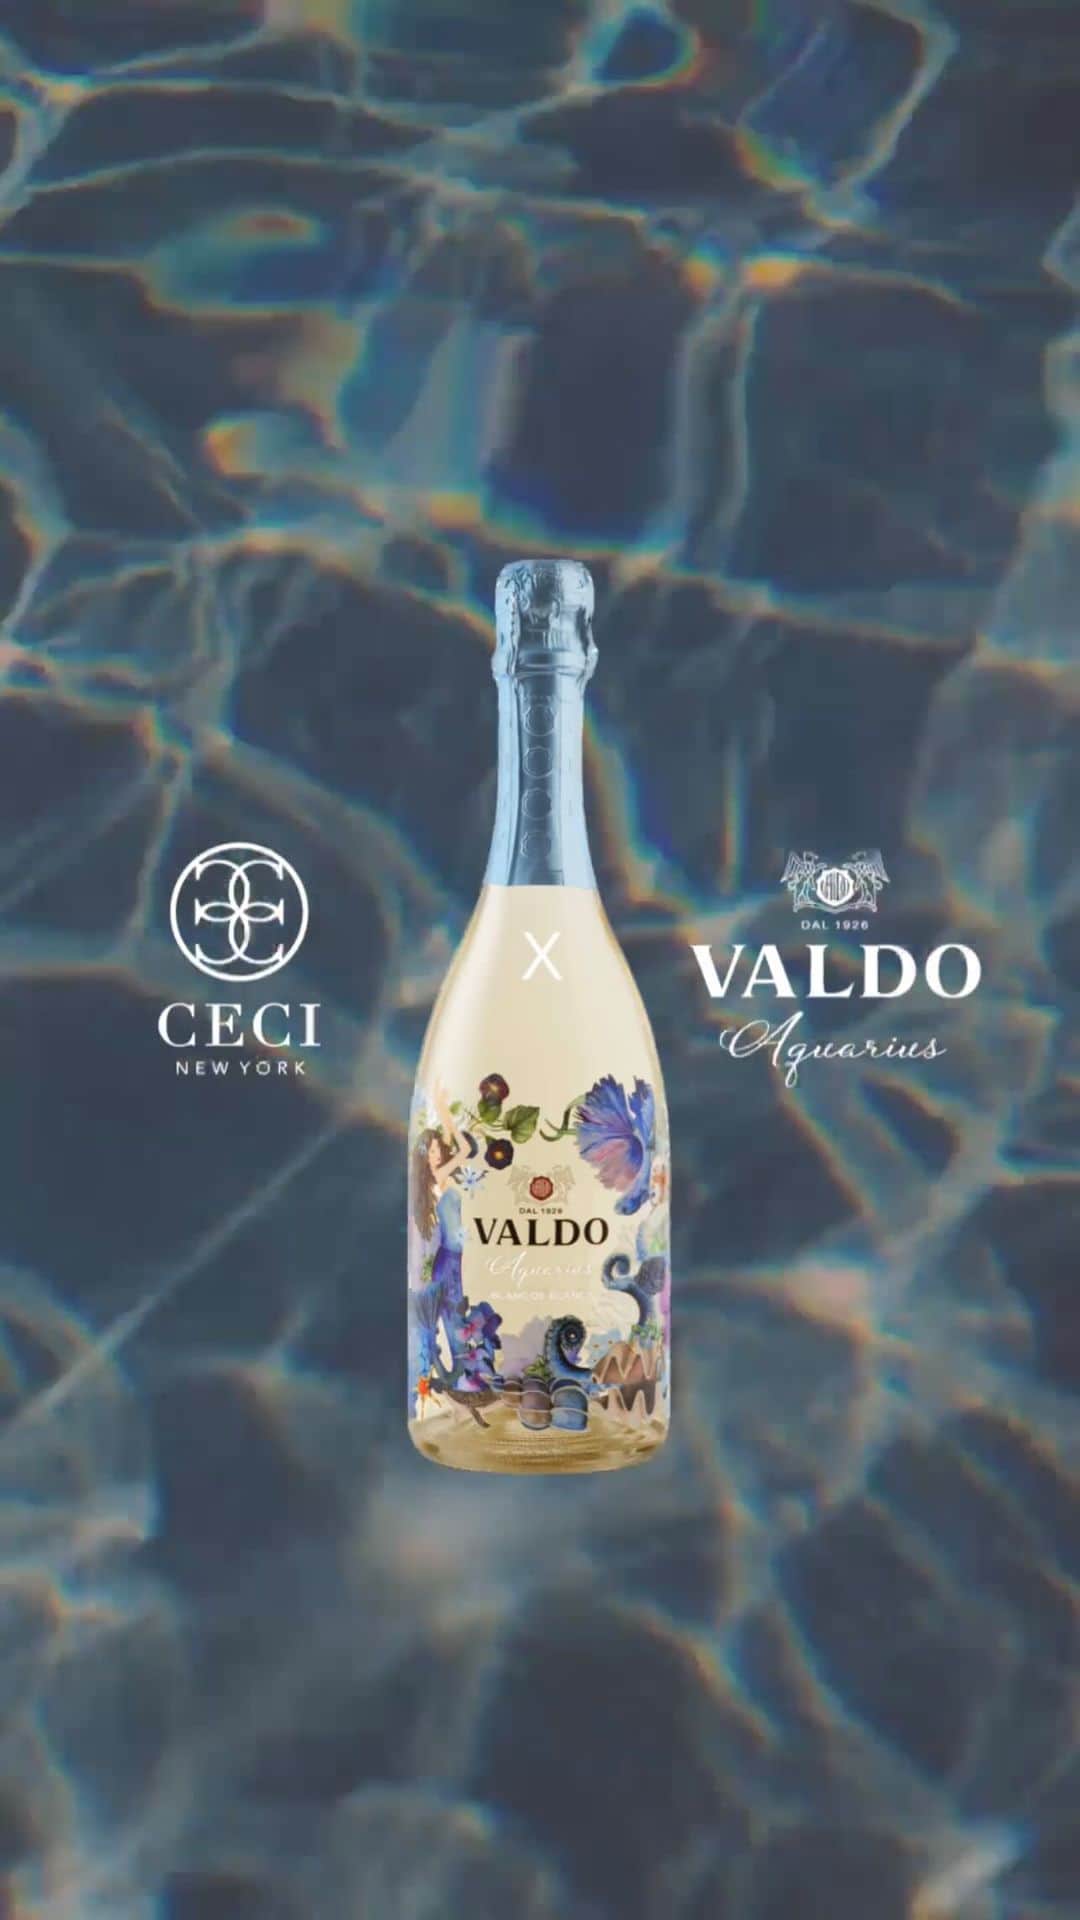 Ceci Johnsonのインスタグラム：「CECI X VALDO | Raise your glass to a sparkling new chapter! Another @cecinewyork for @valdo_spumanti Special Edition Sparkling Wine bottle has just been released in Milan.   Introducing Aquarius, a new Blanc de Blancs hand painted by none other than our very own @cecijohnson, the founder of Ceci New York.  Dive into a world where artistry and wine unite. Inspired by the mysterious and sensational water world, Ceci’s brushstrokes and creativity grace every bottle of Aquarius.  Stay tuned for more coverage of the launch coming from Milano in the next few days! Cheers!!  #CecixValdo  #cecinewyork #shopceci #watercolor #illustrationartist #valdo #blancdeblancs  #sparklingwine」